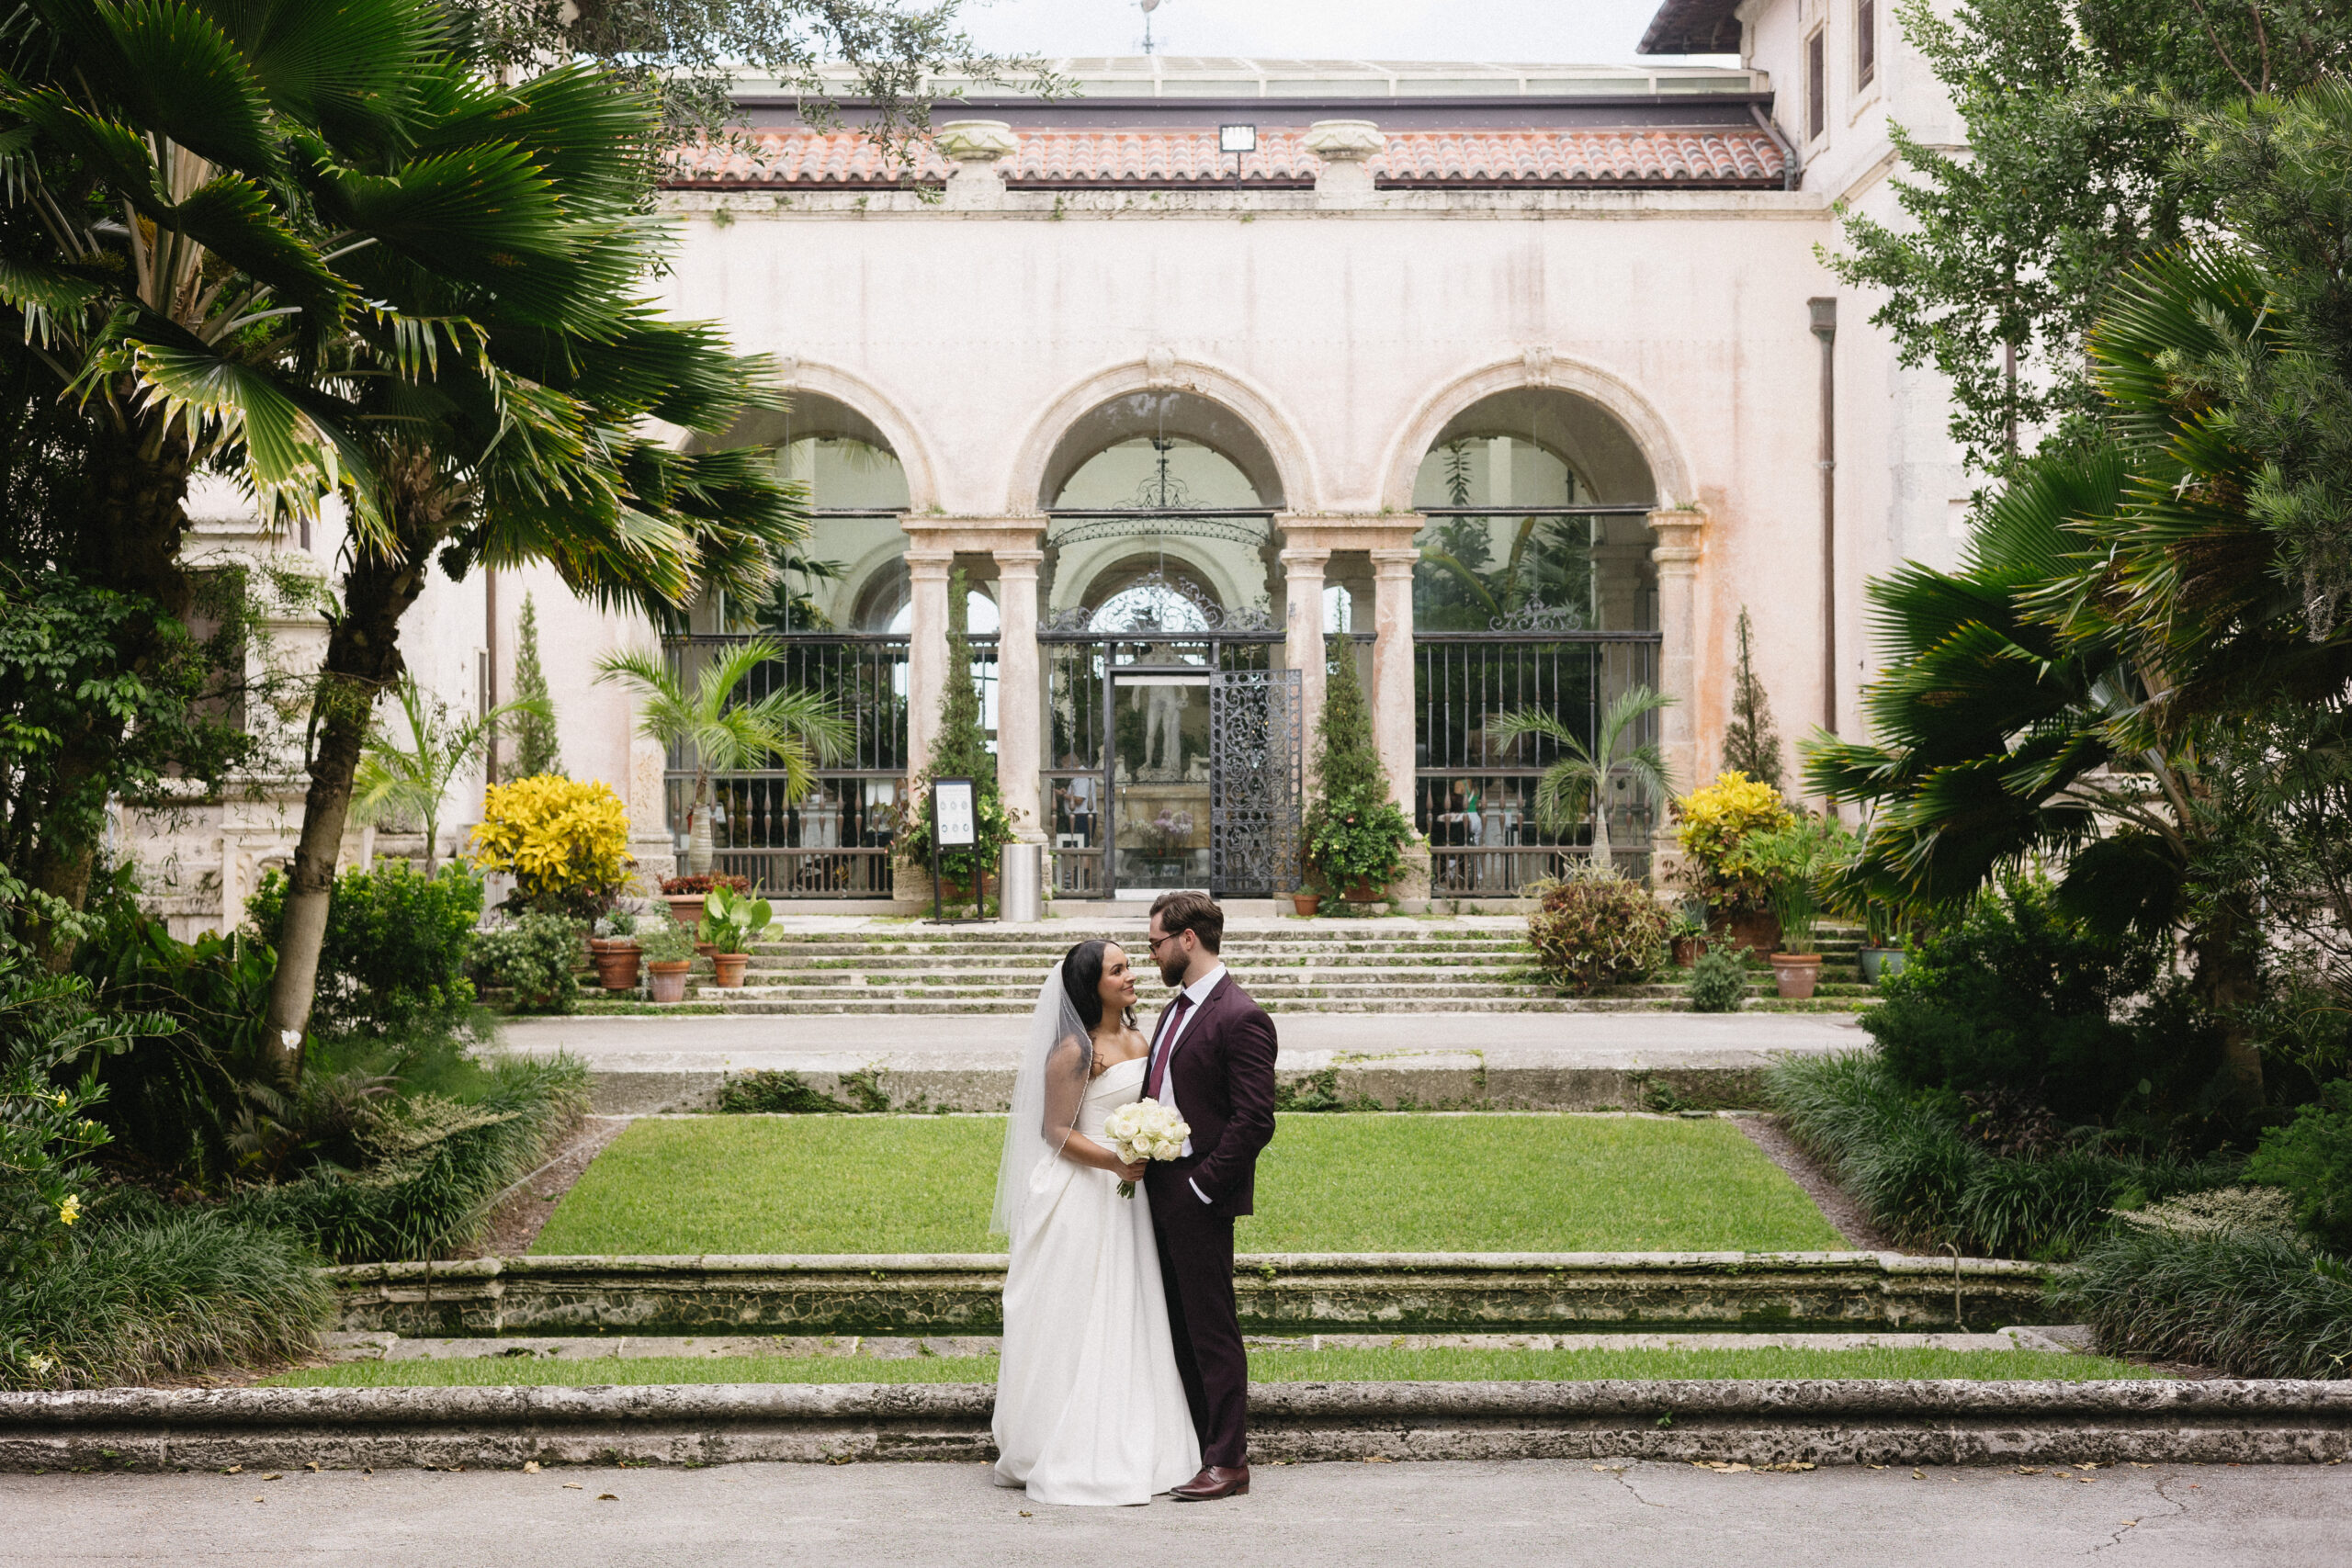 Sophisticated + Chic Wedding Amidst Old-World European